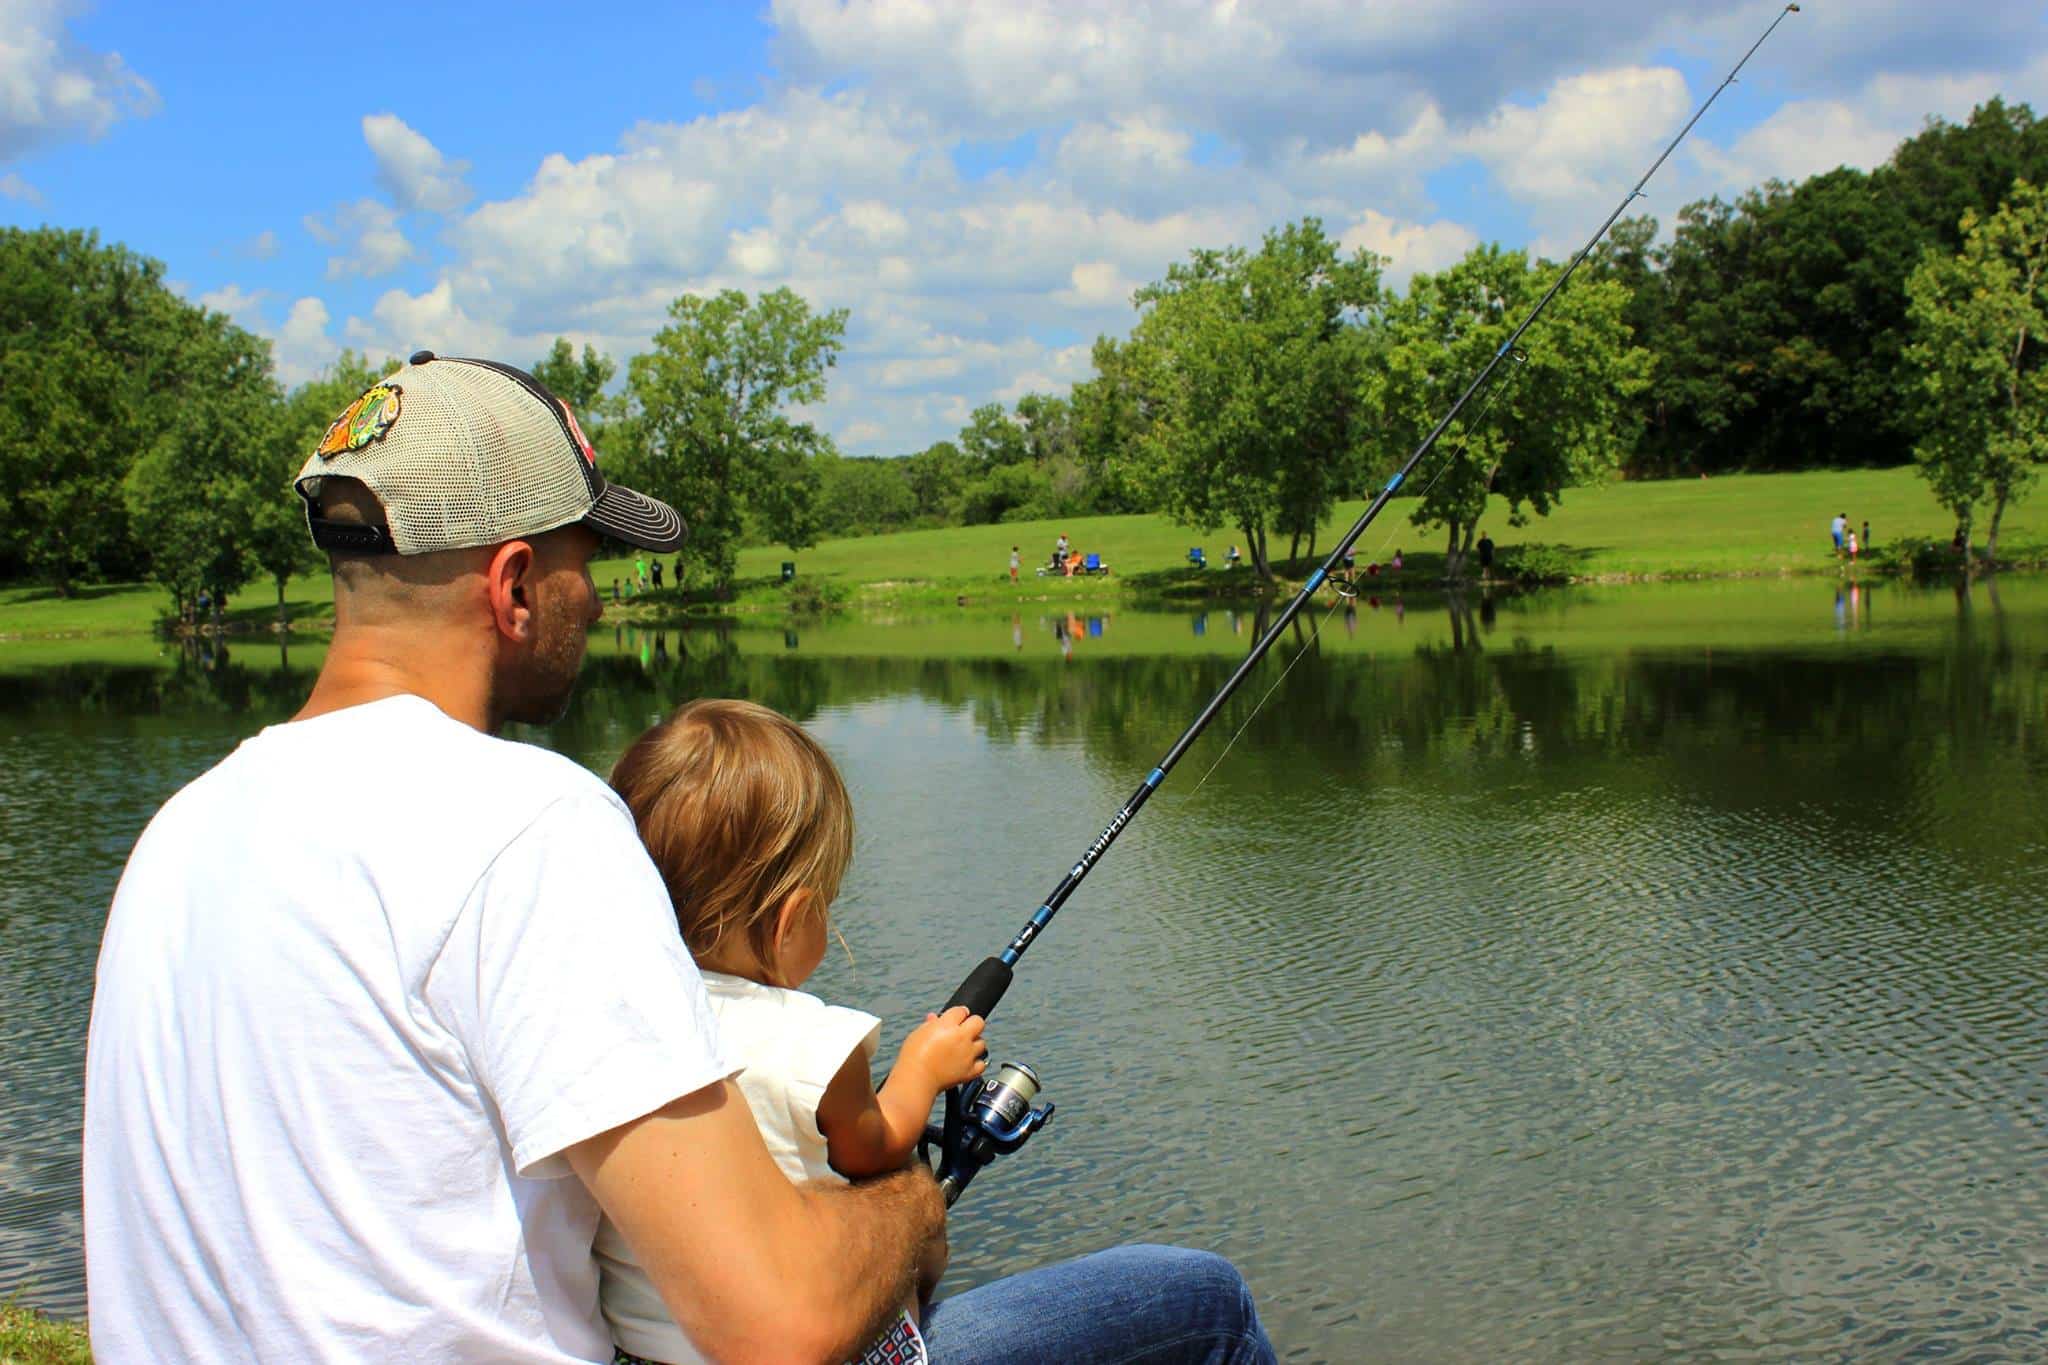 Get Kids Hooked on Fishing' Event is Coming Back in 2018 - Ivy League Kids